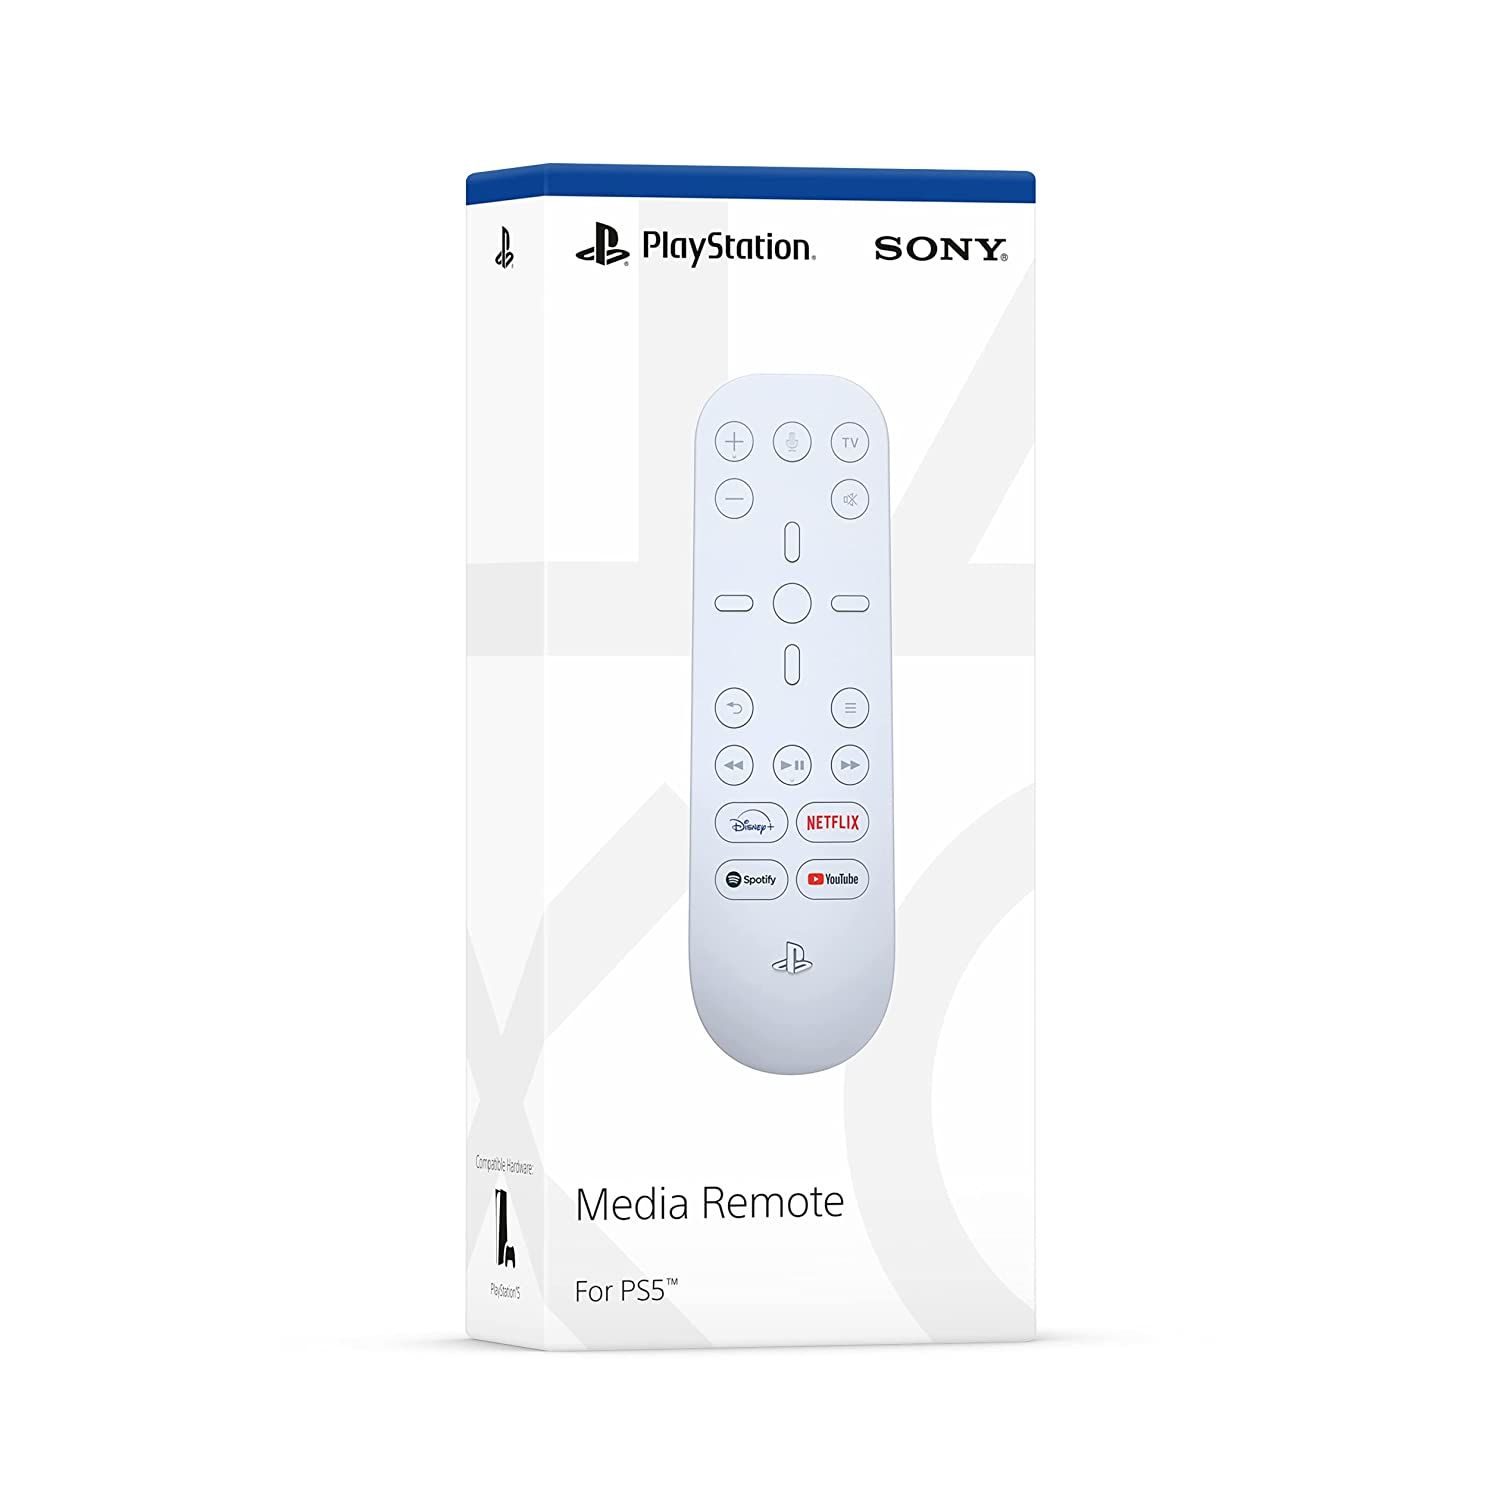 Playstation Media Remote for PS5